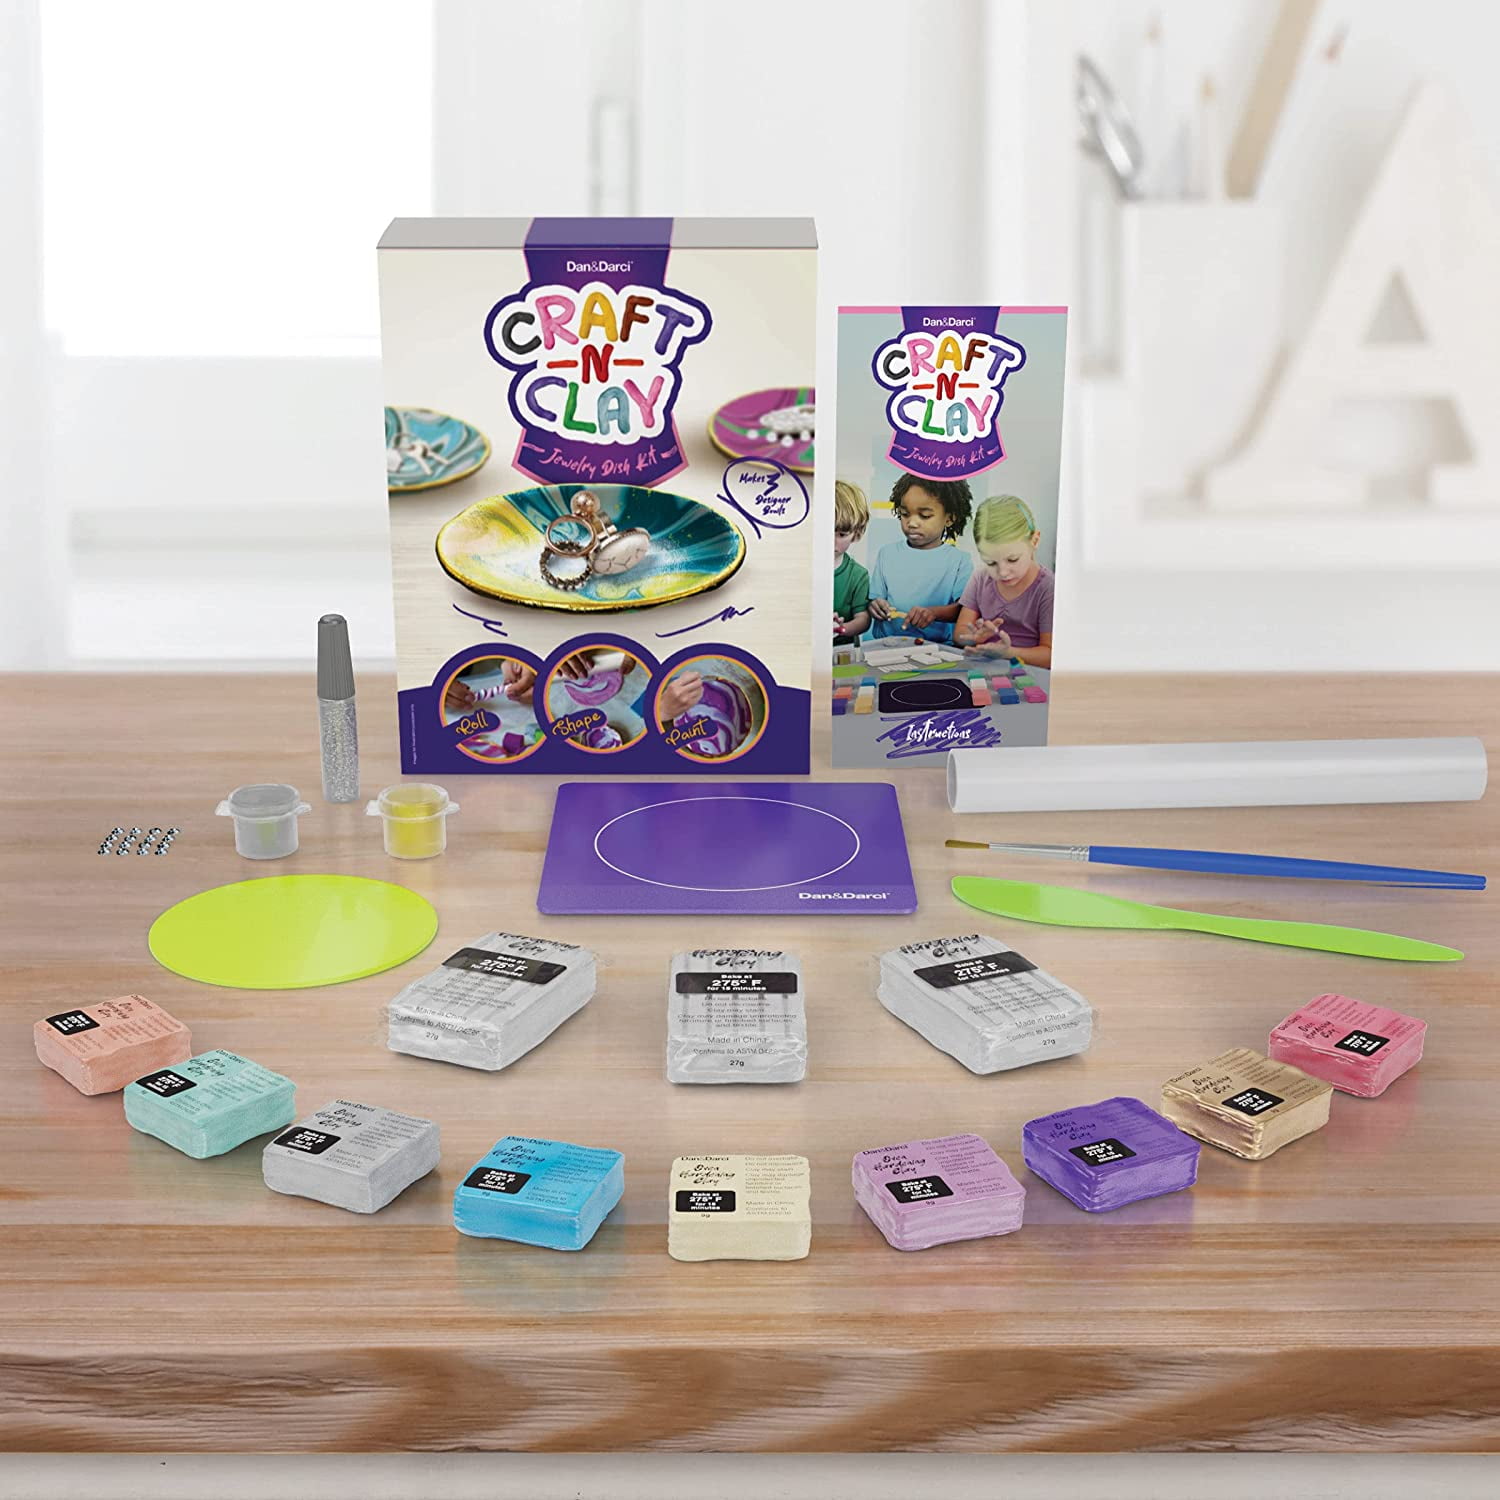 Dan&Darci Craft 'n Clay - Jewelry Dish Making Kit for Kids and Tween Girls  Age 8-14 Year Old - Best DIY Arts & Crafts Gift - Girl Birthday Gifts Ideas  - Art Projects Kits 